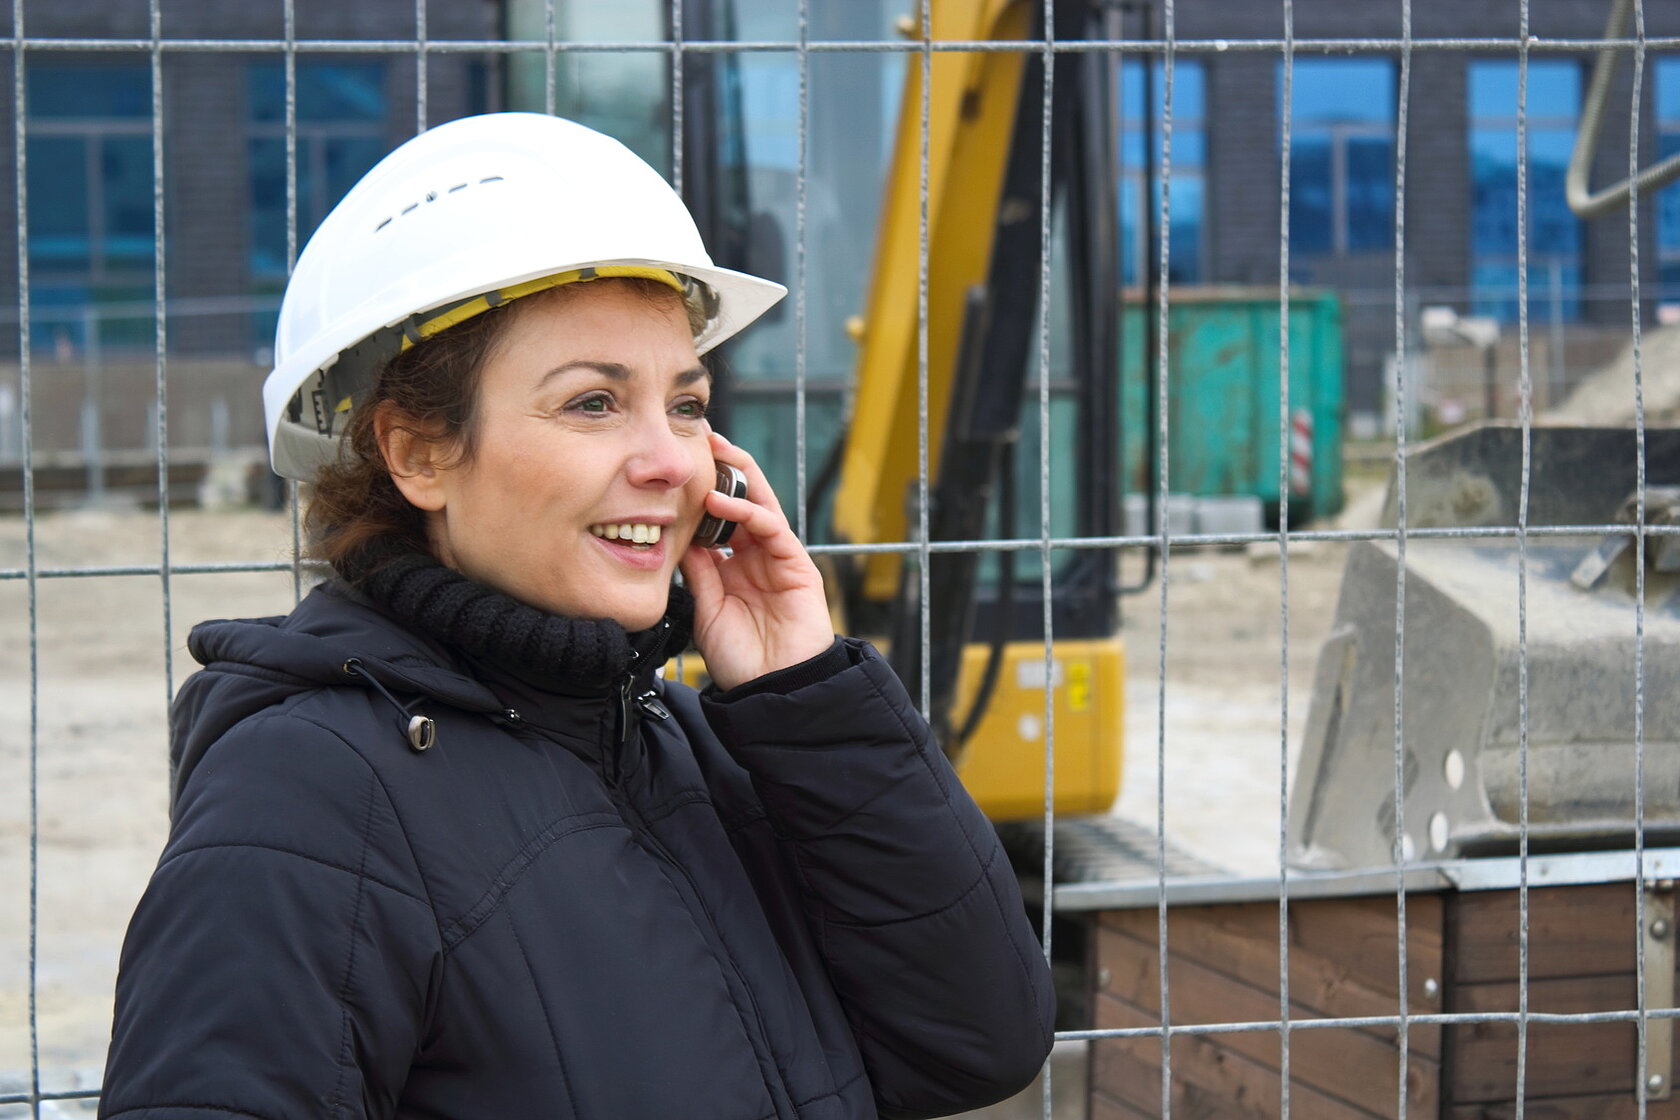 young woman wearing a hard hat and talking into a mobile phone on a construction site